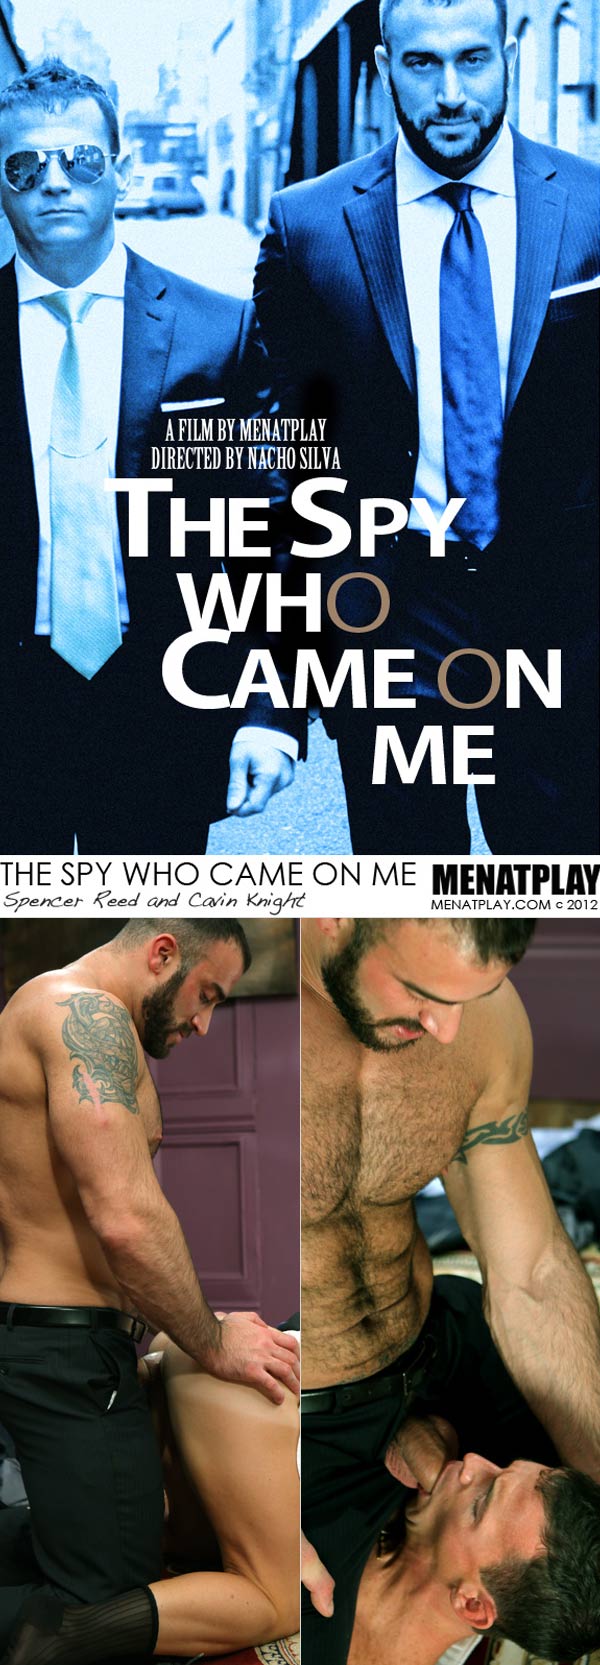 The Spy Who Came On Me (Spencer Reed & Cavin Knight) on MenAtPlay